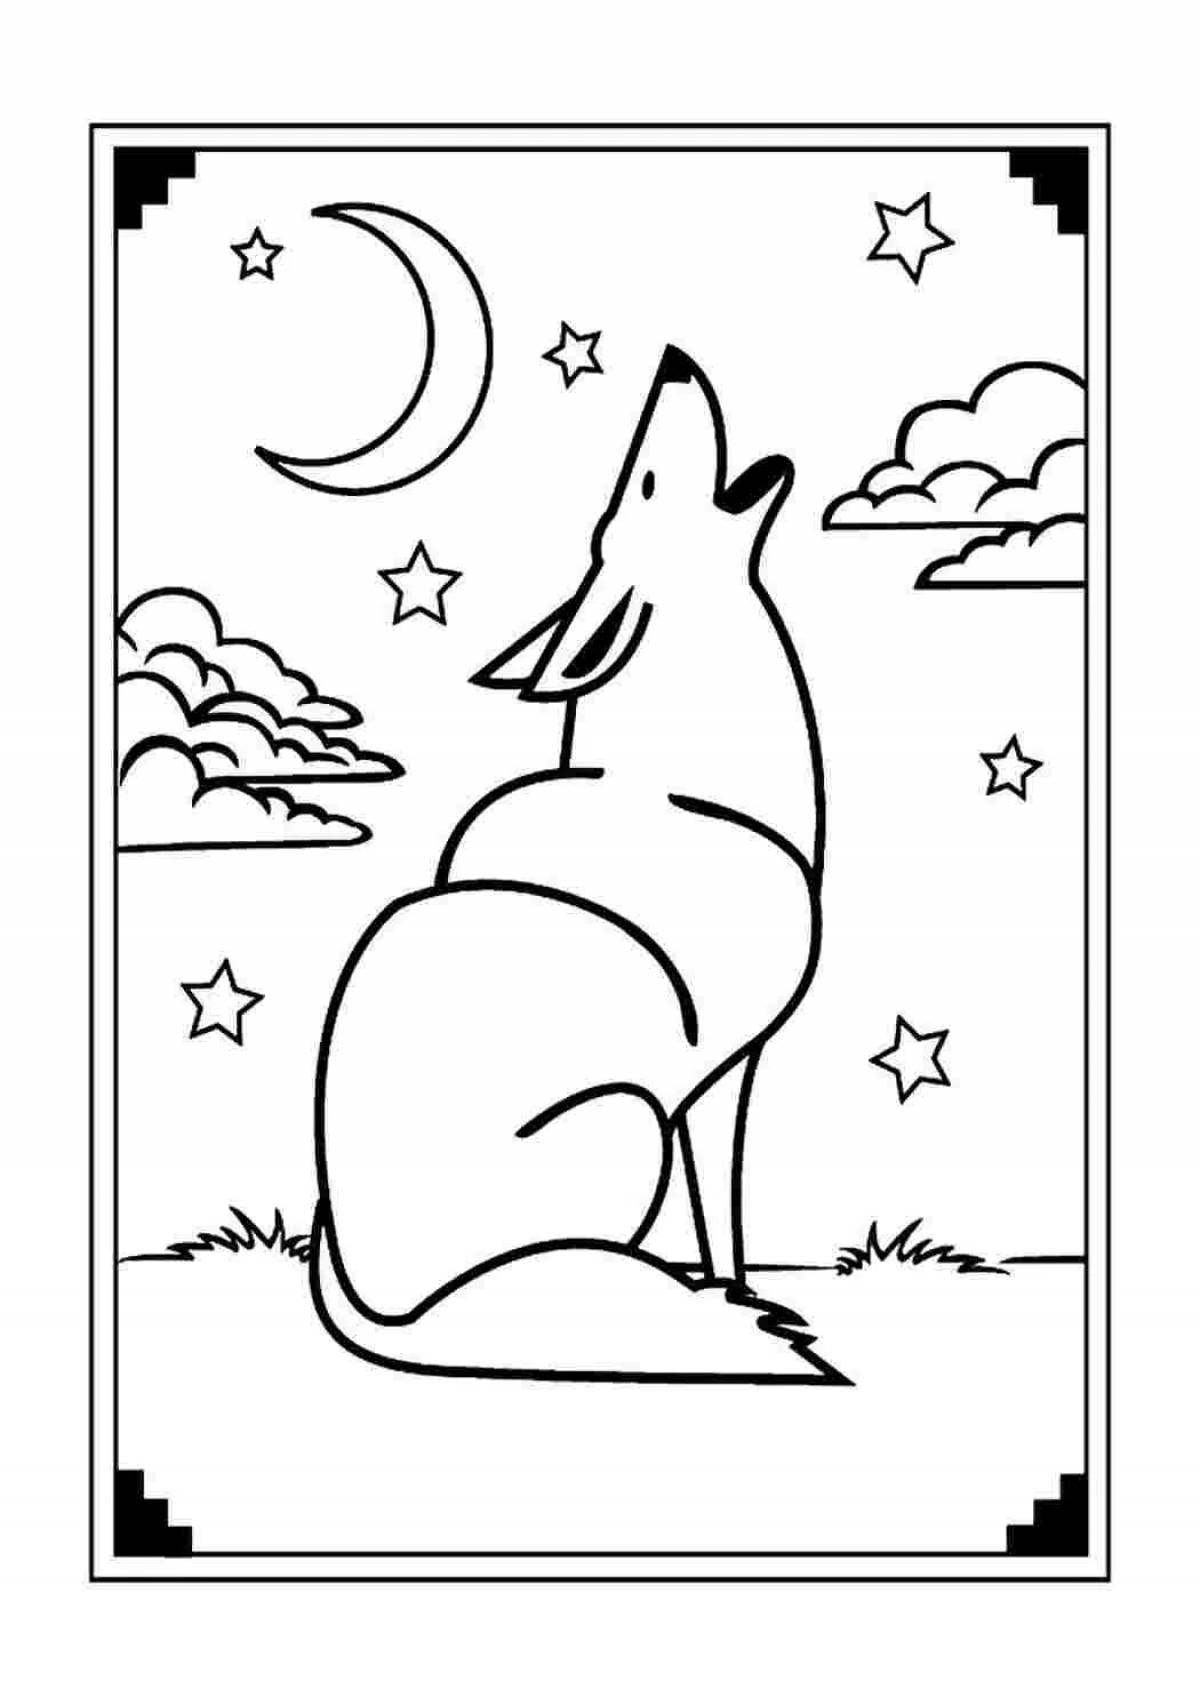 Wolf howling at the moon #9